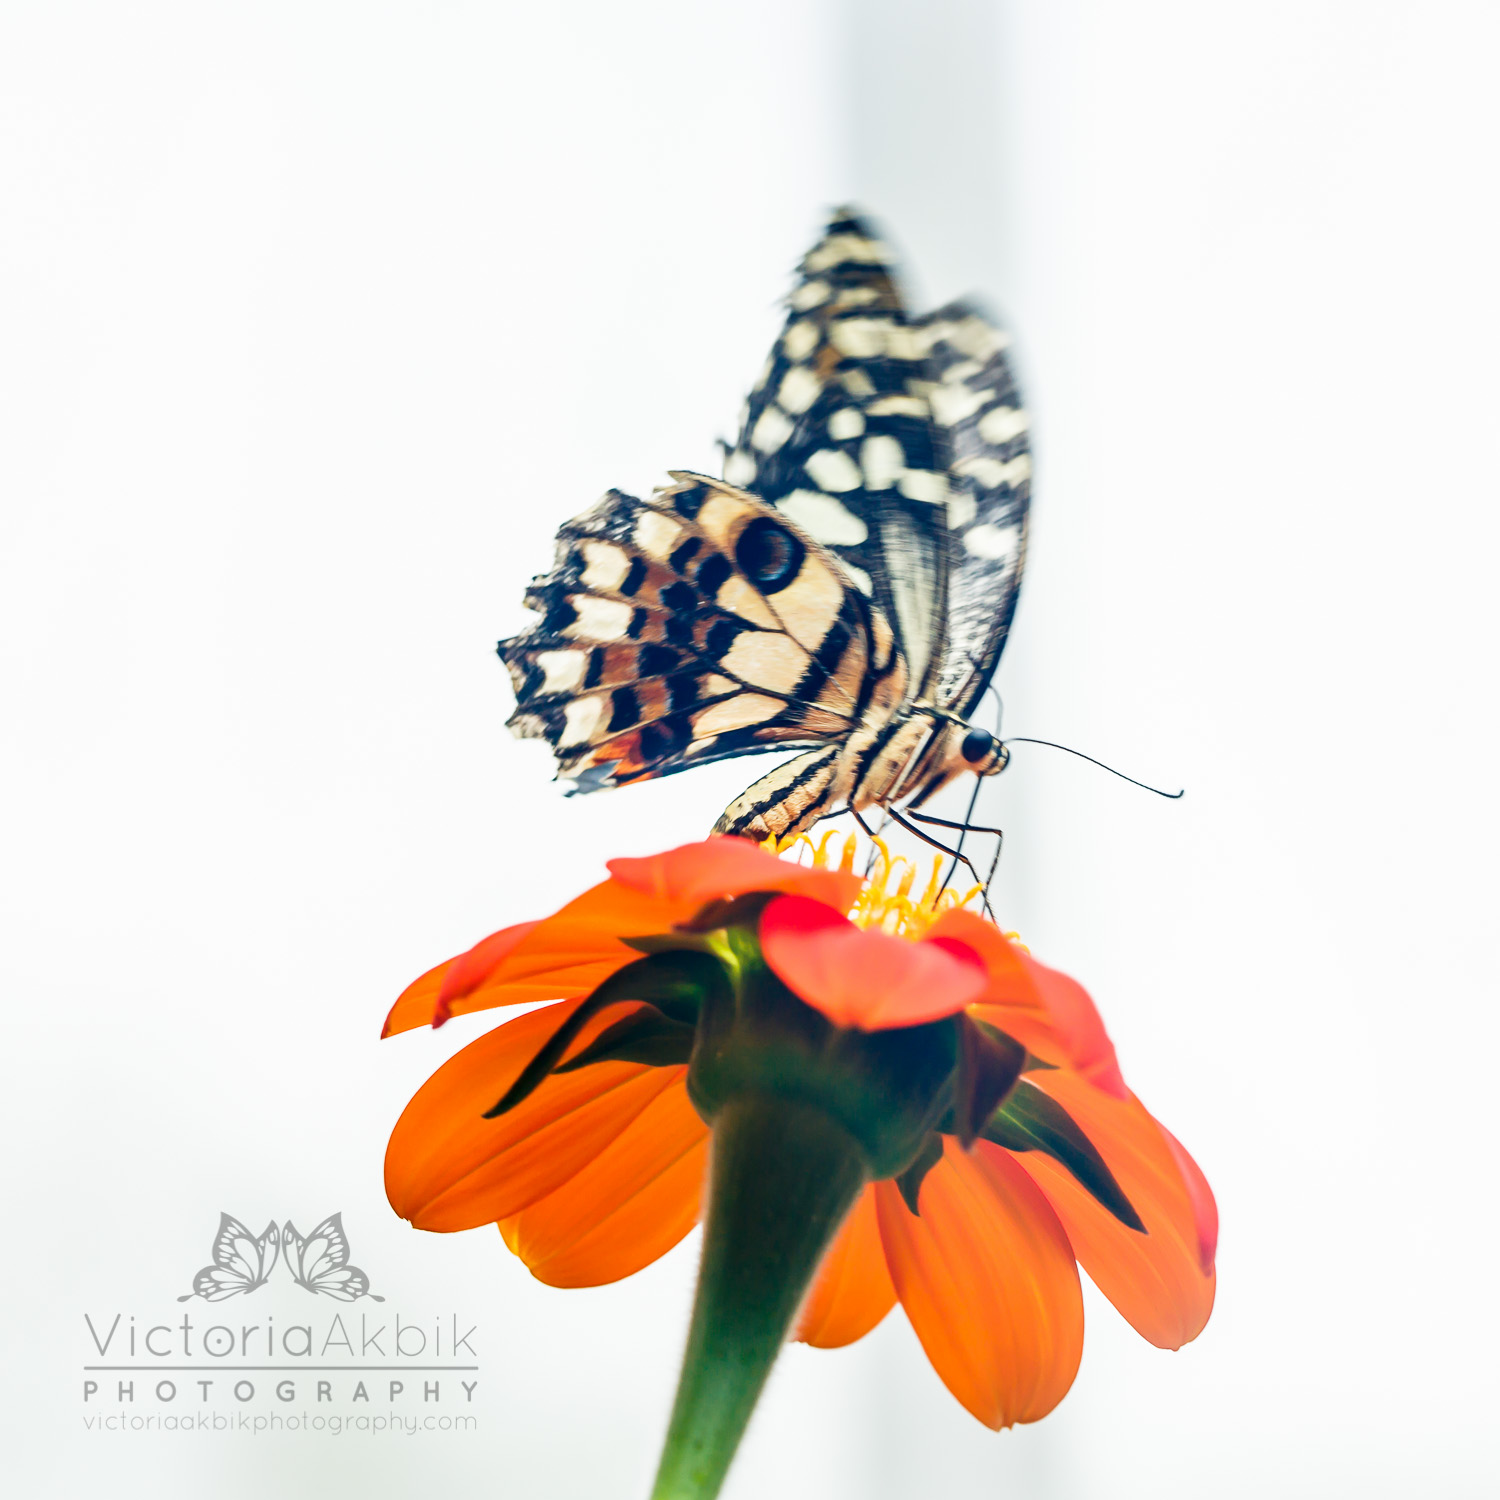 Butterfly Family Memories | Abu Dhabi Lifestyle Family Photography » Victoria Akbik Photography